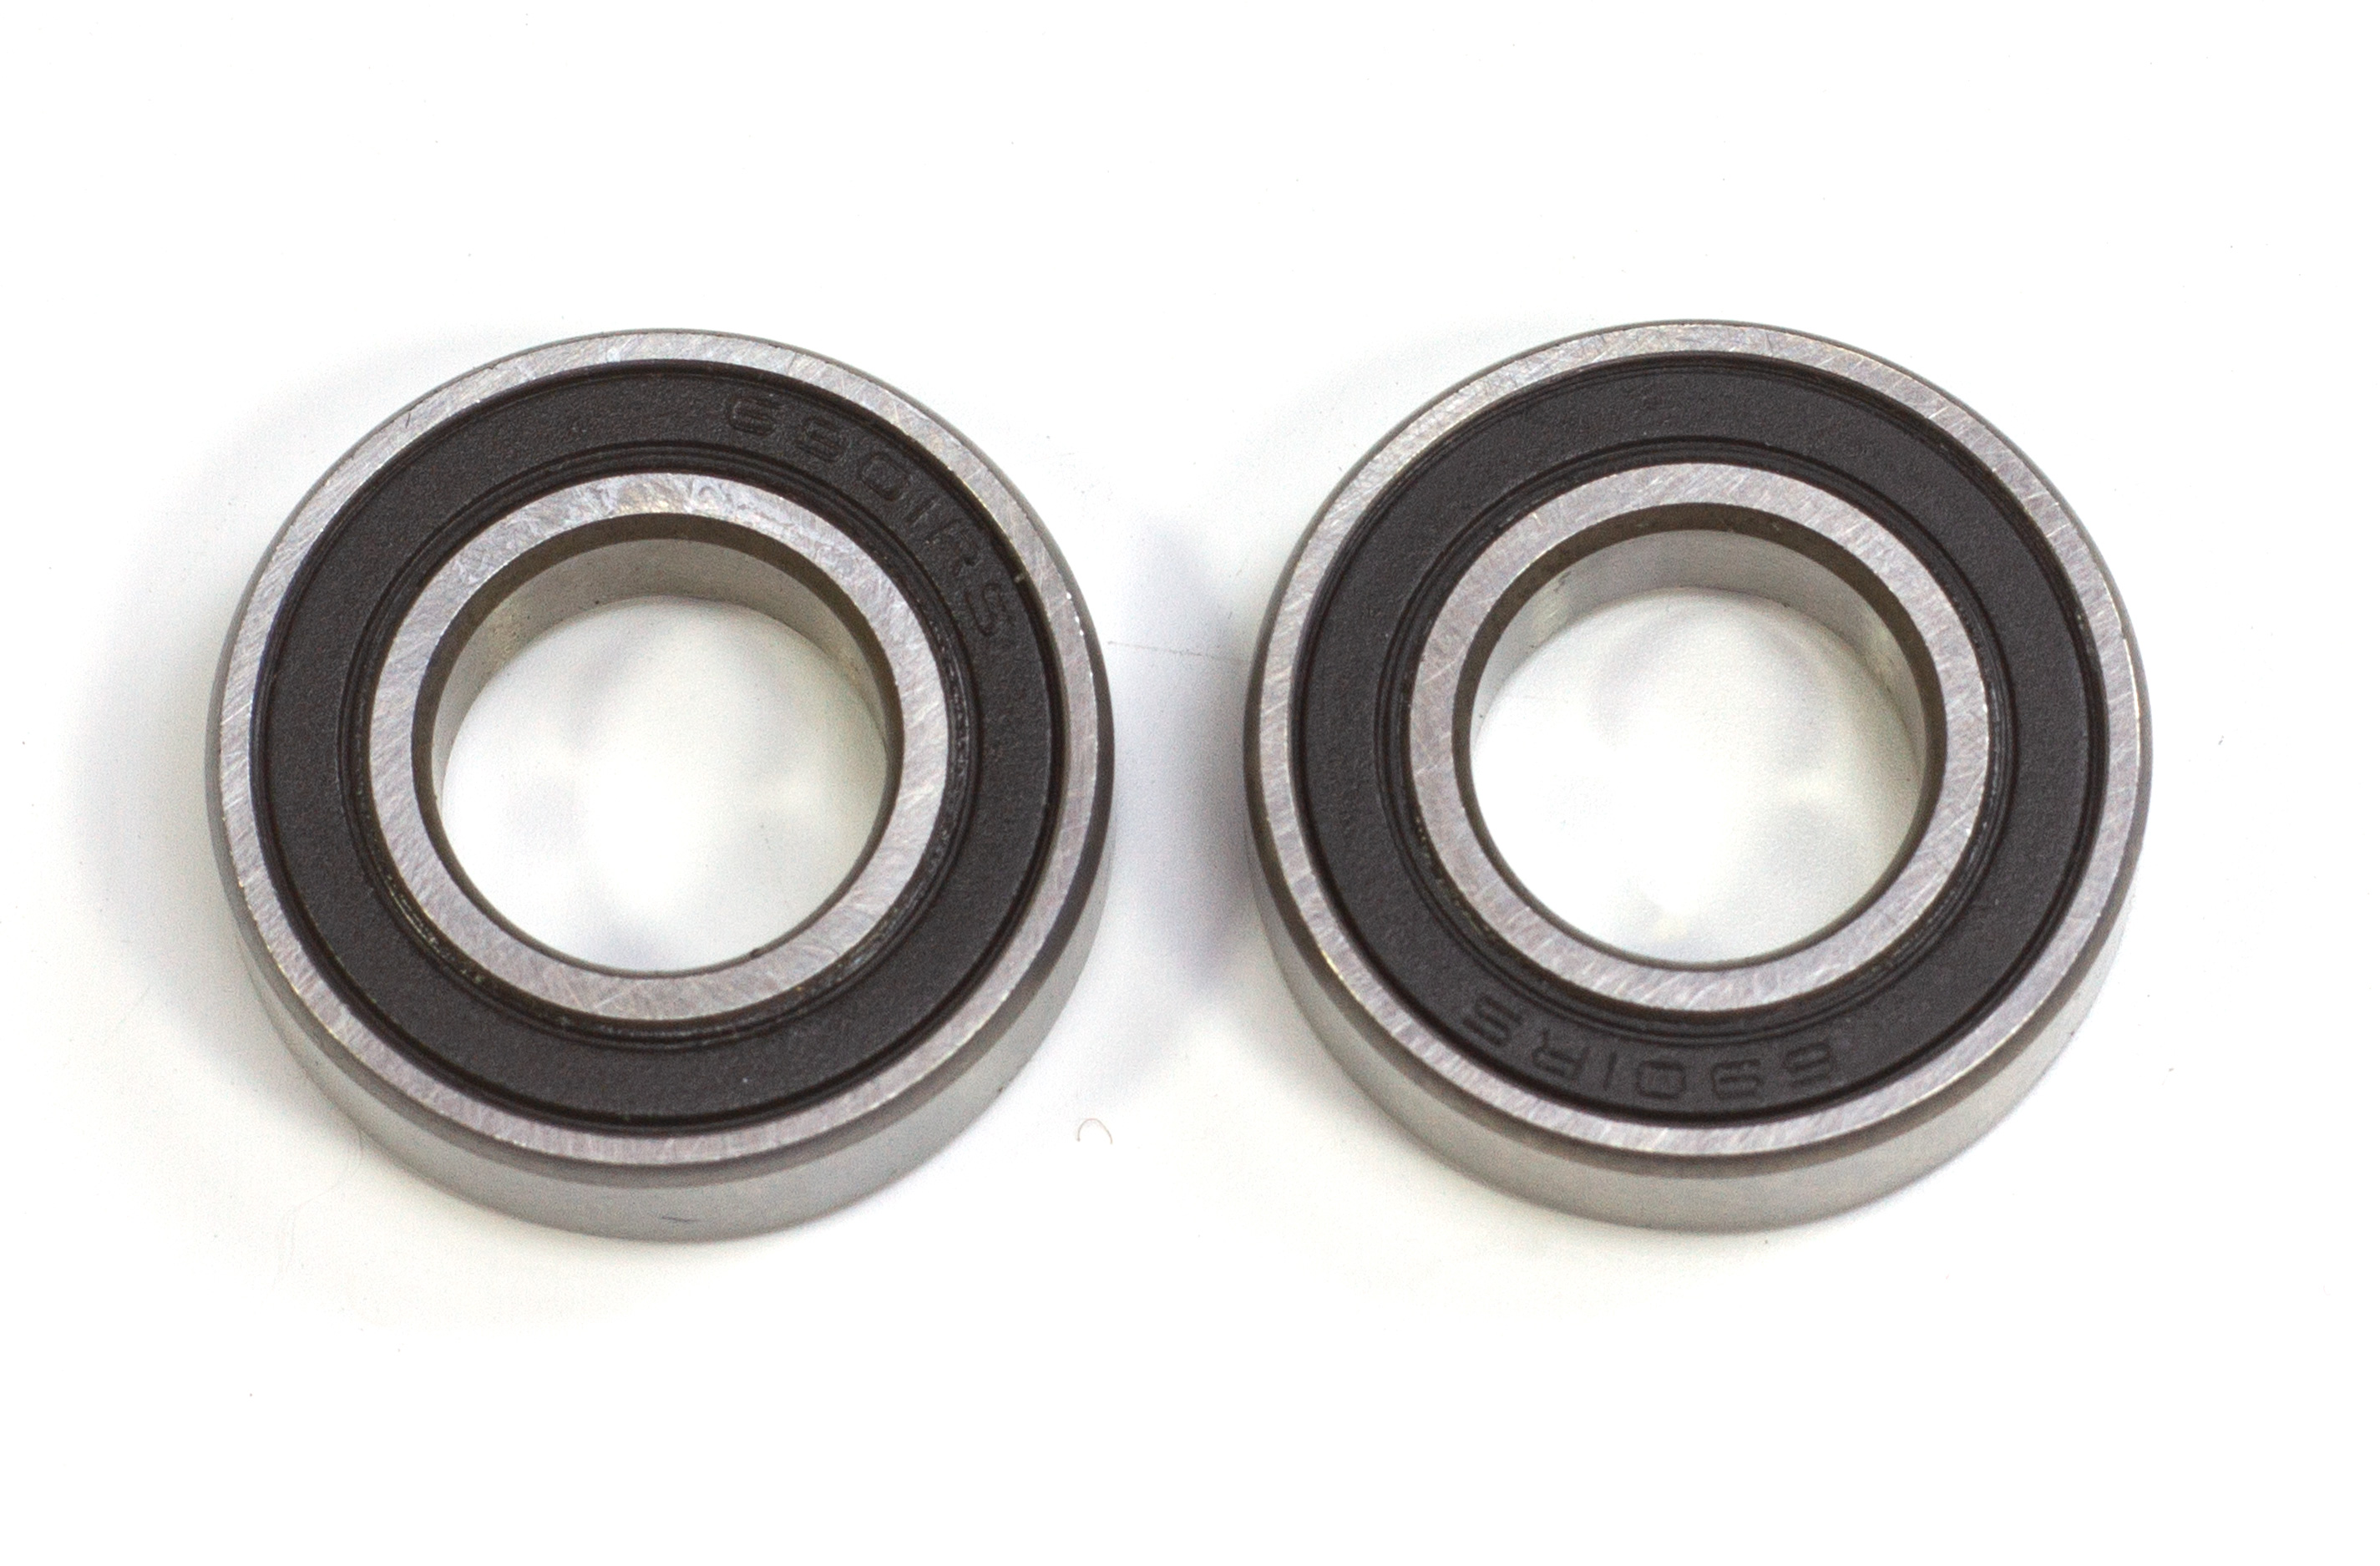 D03/1 Carson Ball bearing 12x24x6 mm for Wild GP Attack